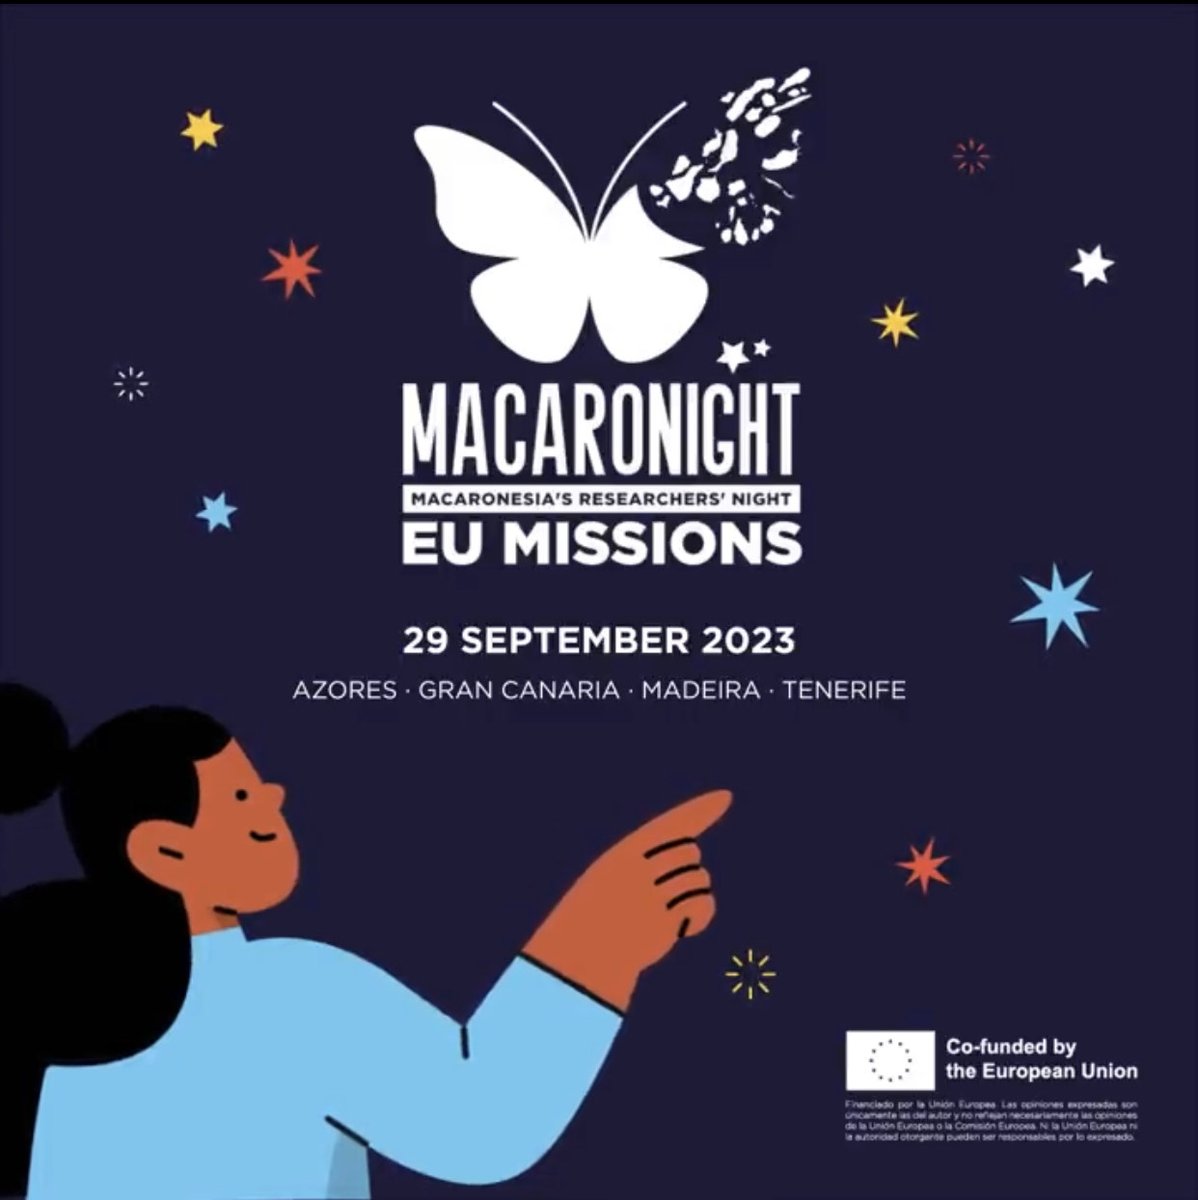 🚀 Join the Macaronight 2023!

🌟 On September 29th, dive into a world of hands-on experiments and more.

🌐 Learn more at macaronight.eu
📍 Locations: Tenerife, Gran Canaria, Azores, Madeira
📅 Date: September 29th

#MacaronightEU #EUMissions #ERN23